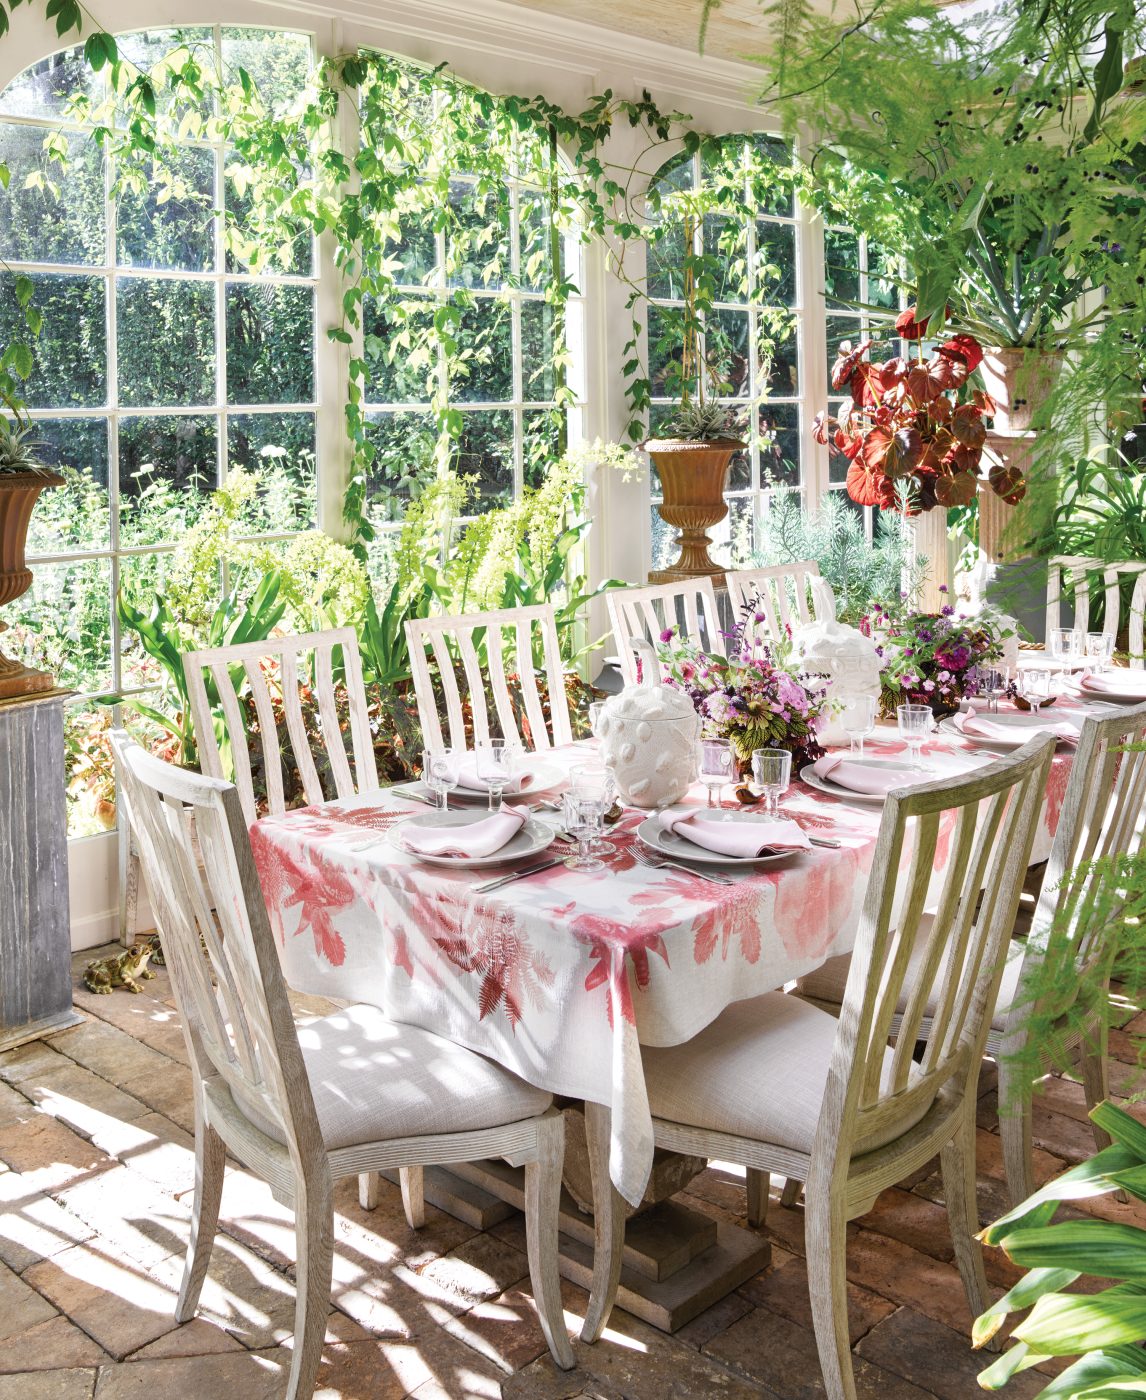 Pink and white tablescape in the garden conservatory of interior designer Bunny Williams in northwest Connecticut